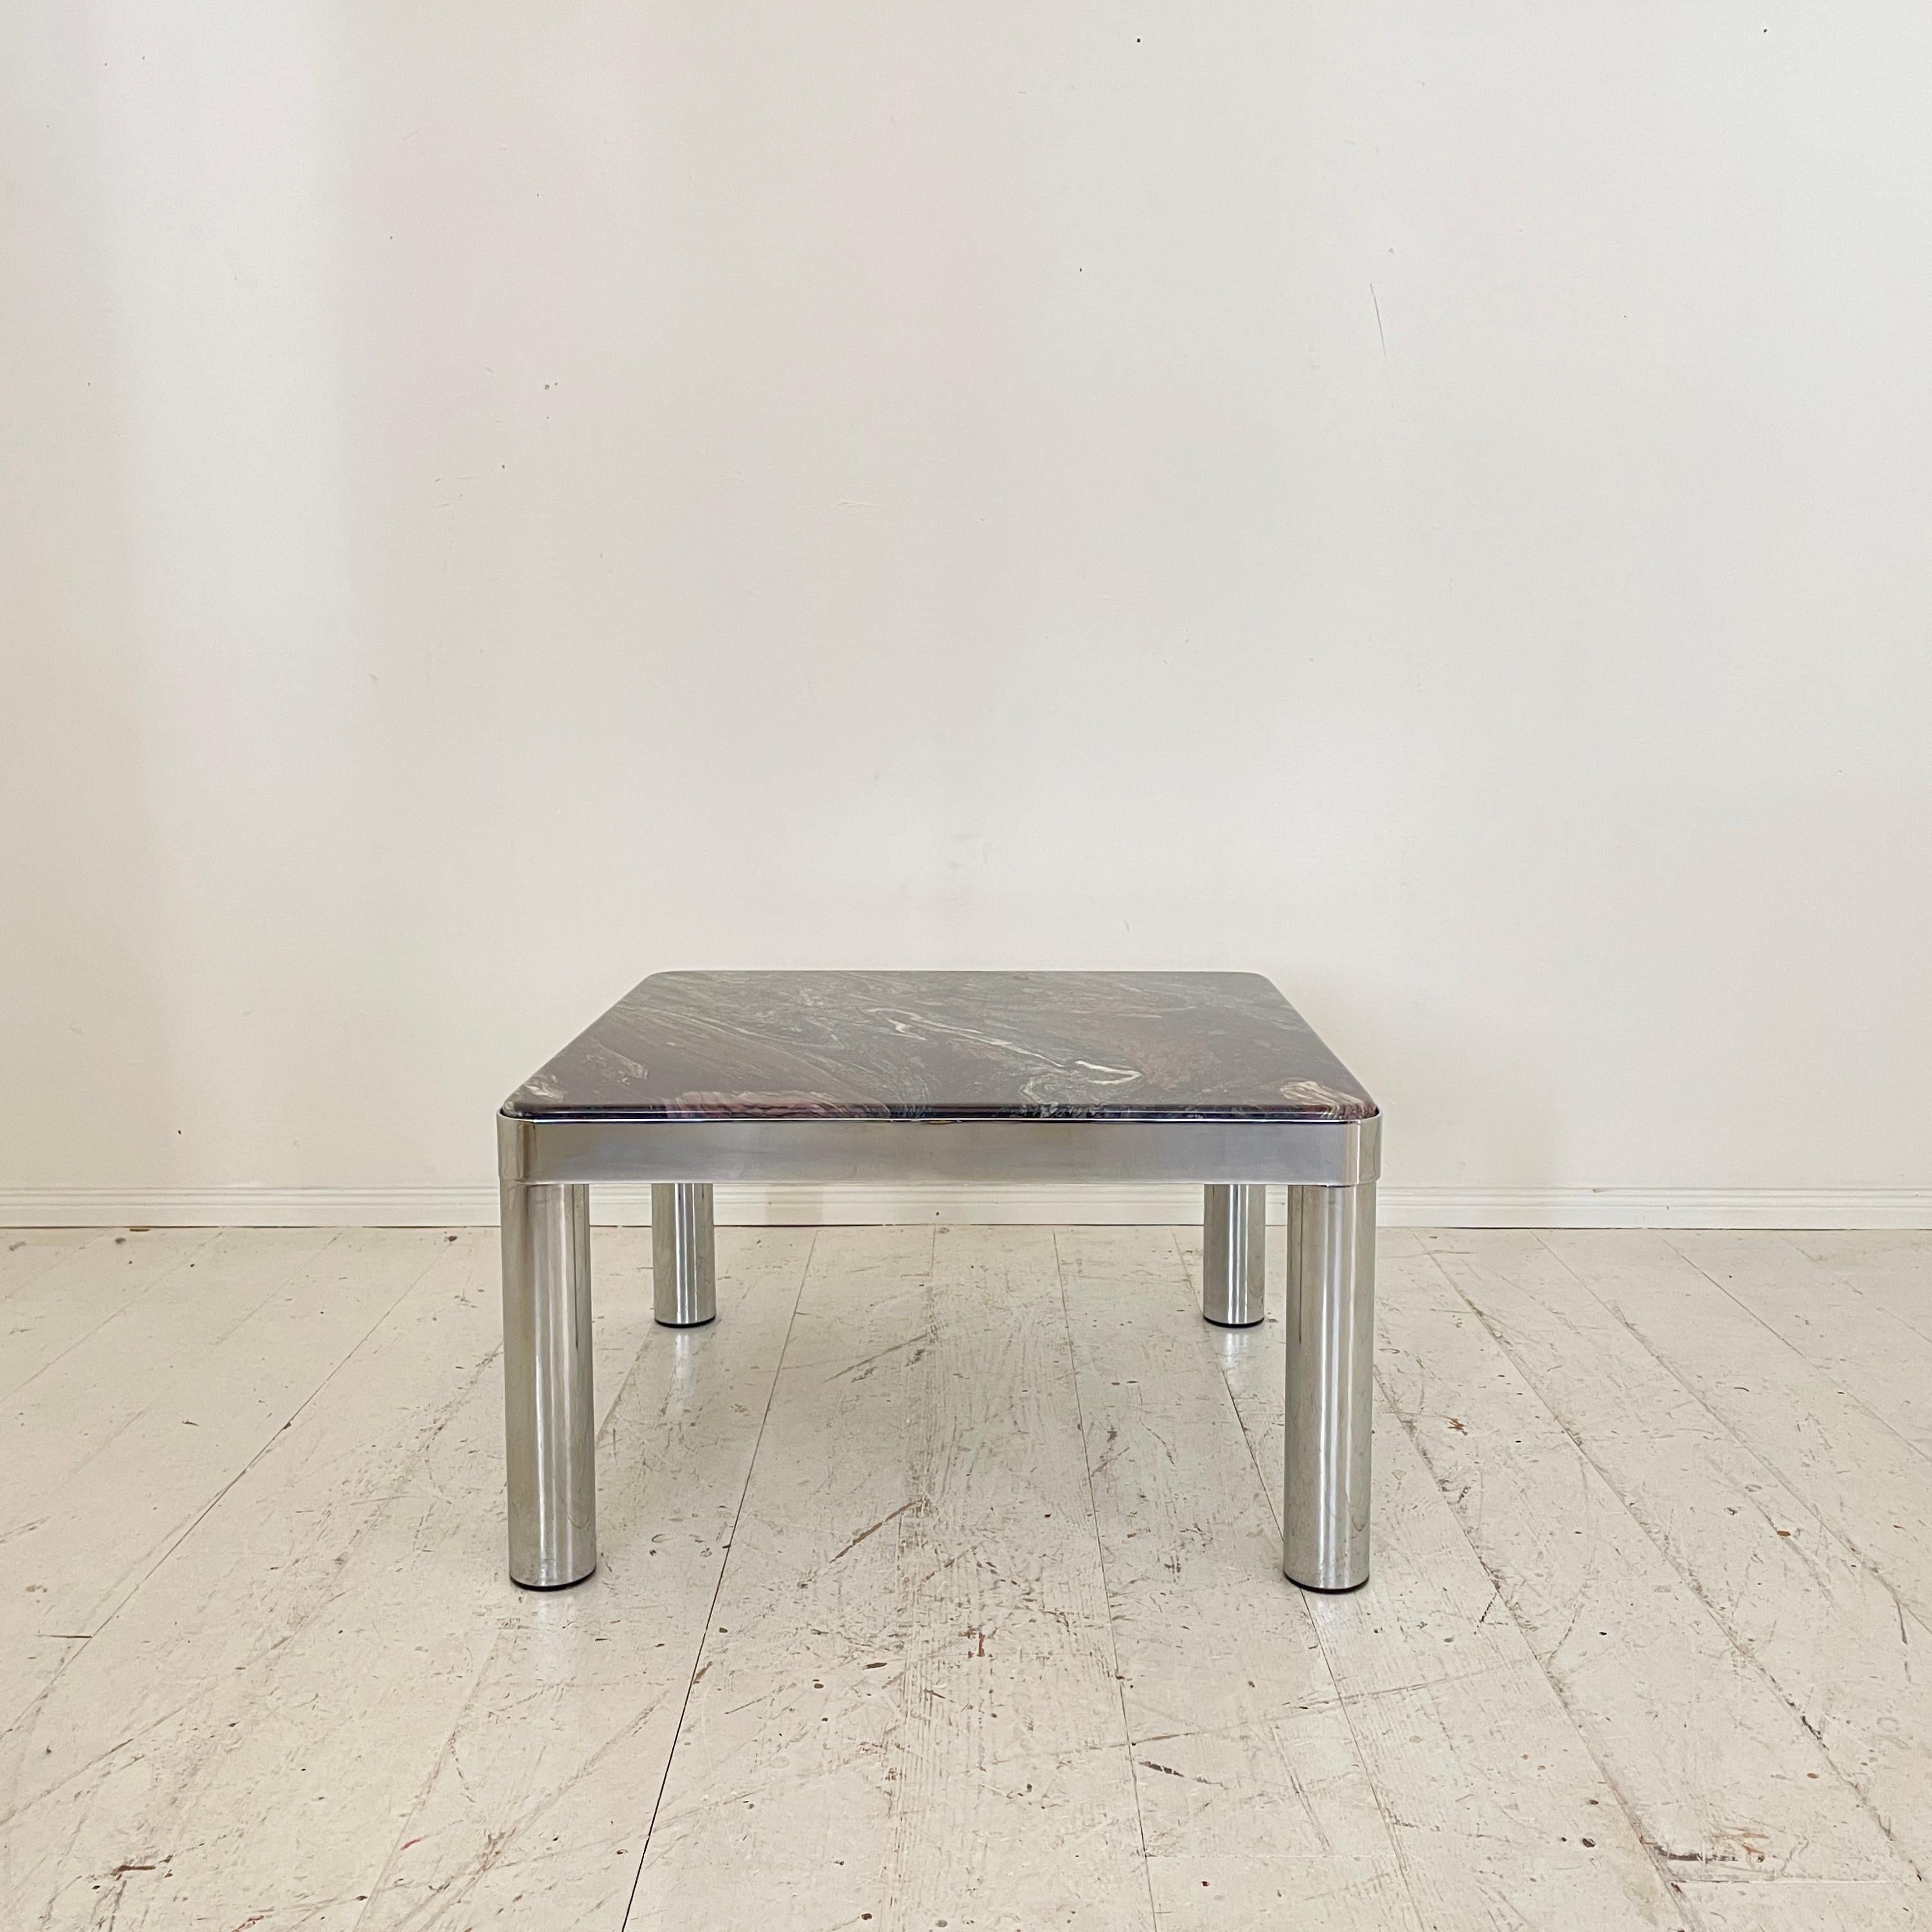 This unique Mid-Century German Coffee Table was made 1971. The table is made out of chromed Metal and Marble.
The table is ion perfect vintage condition.
A unique piece which is a great eye-catcher for your antique, modern, space age or mid-century